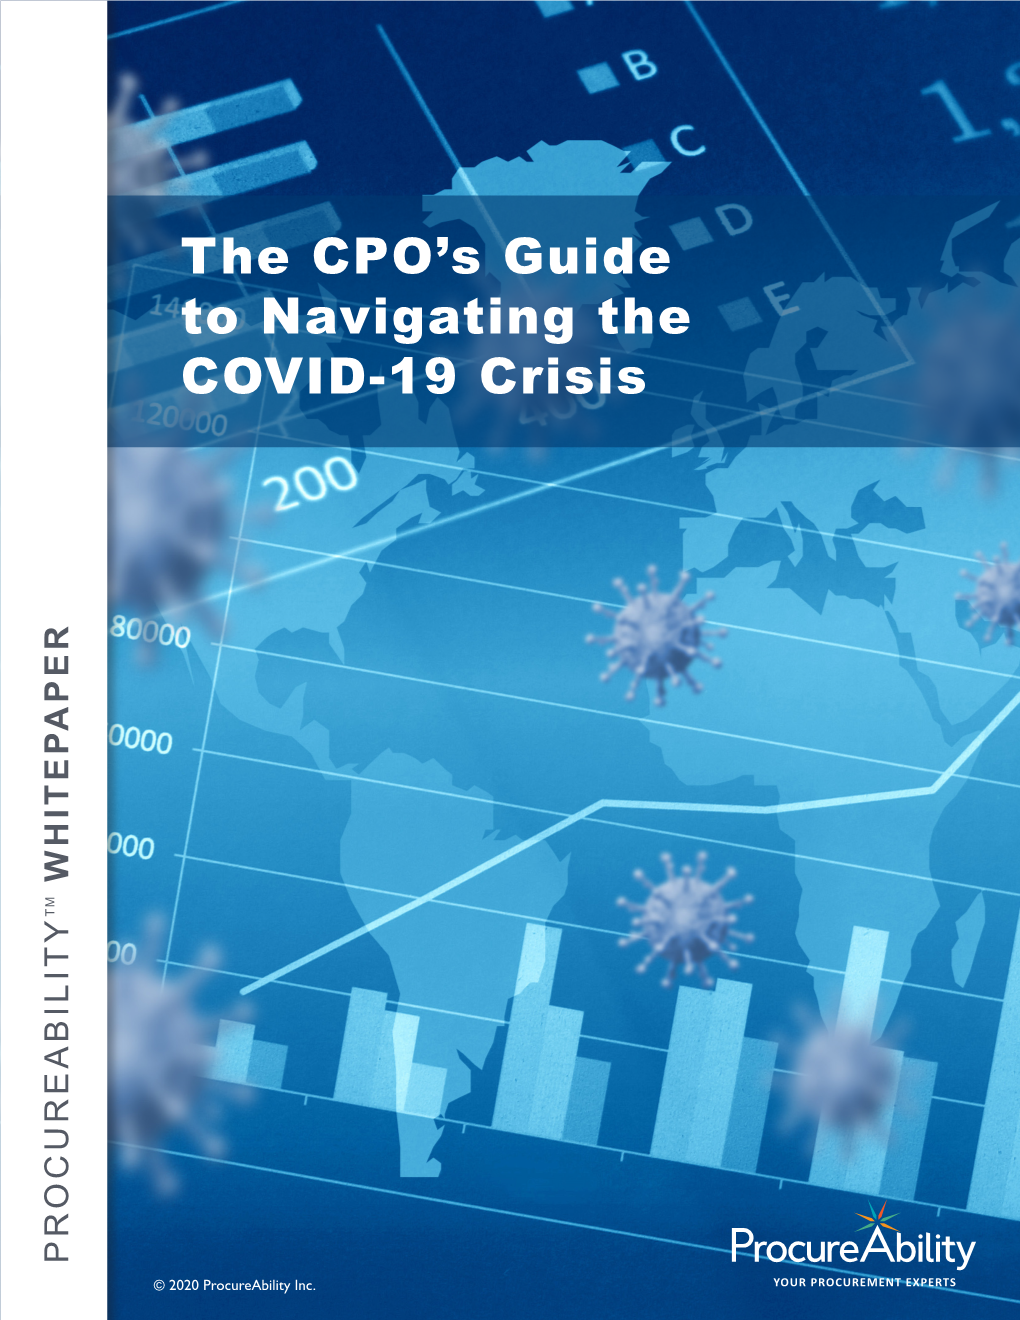 The CPO's Guide to Navigating the COVID-19 Crisis